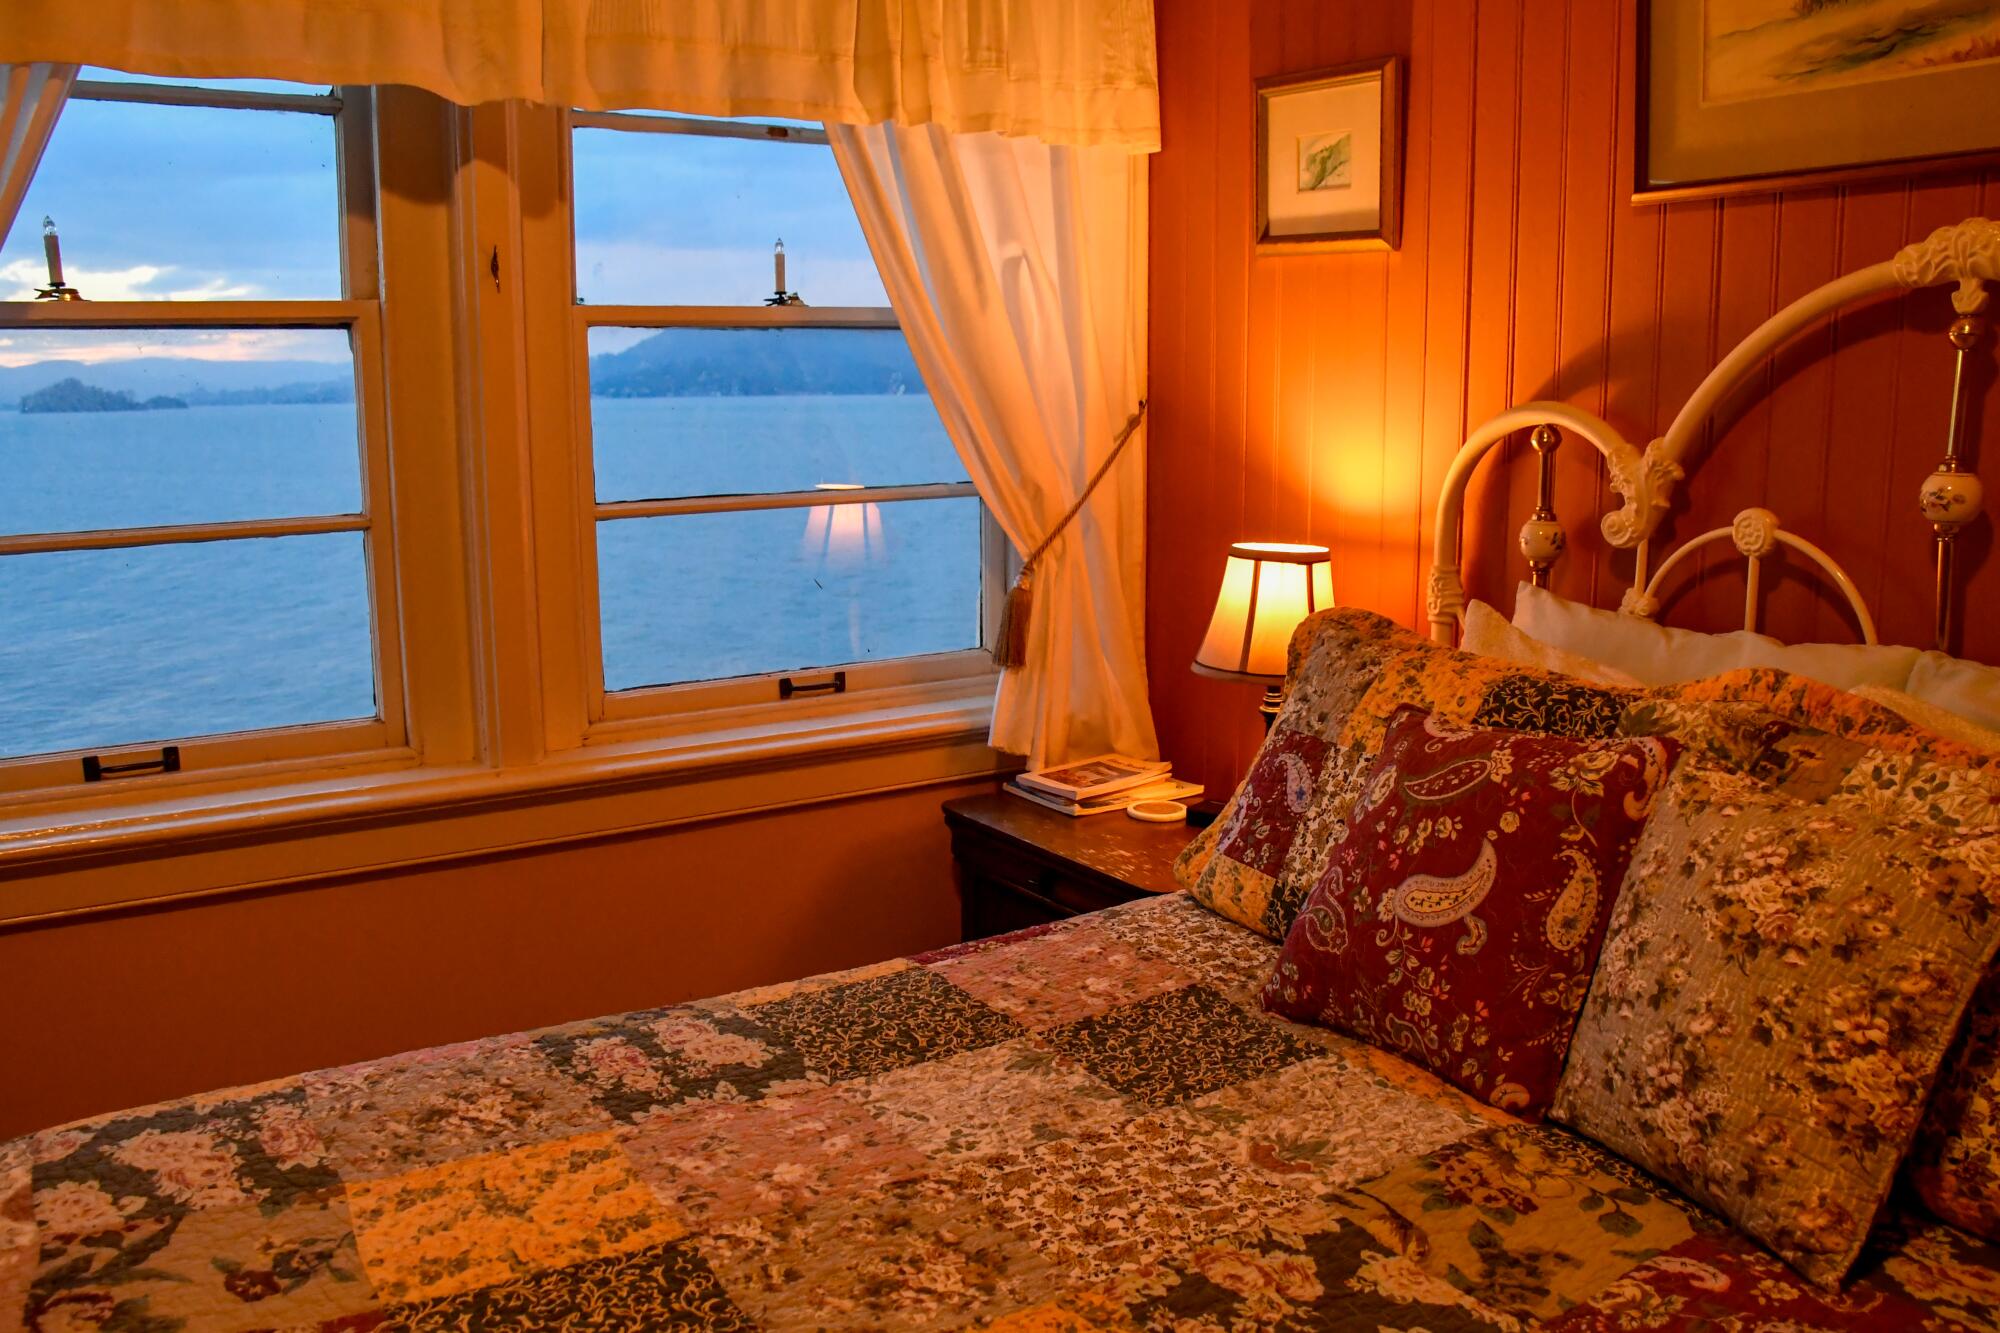 A bedroom at the East Brother Light Station B&B, with quilts on the bed and a view of the water.